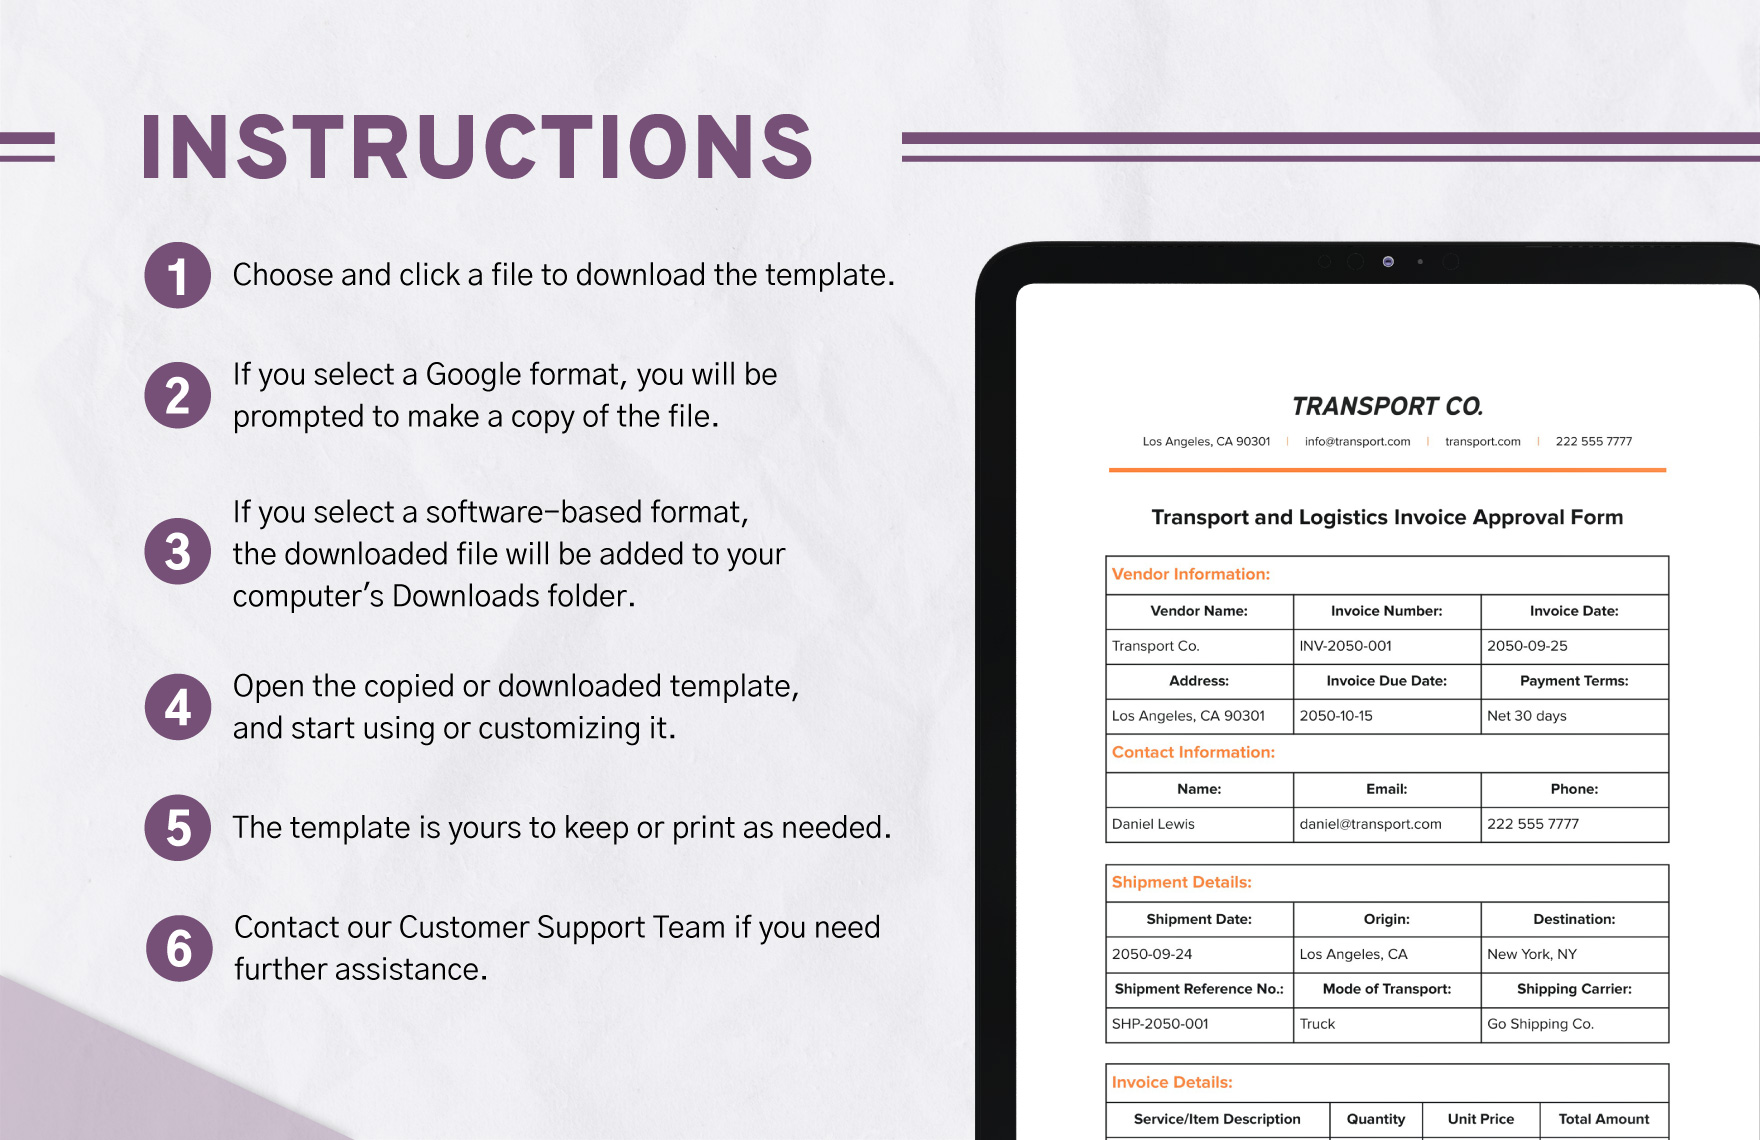 Transport and Logistics Invoice Approval Form Template